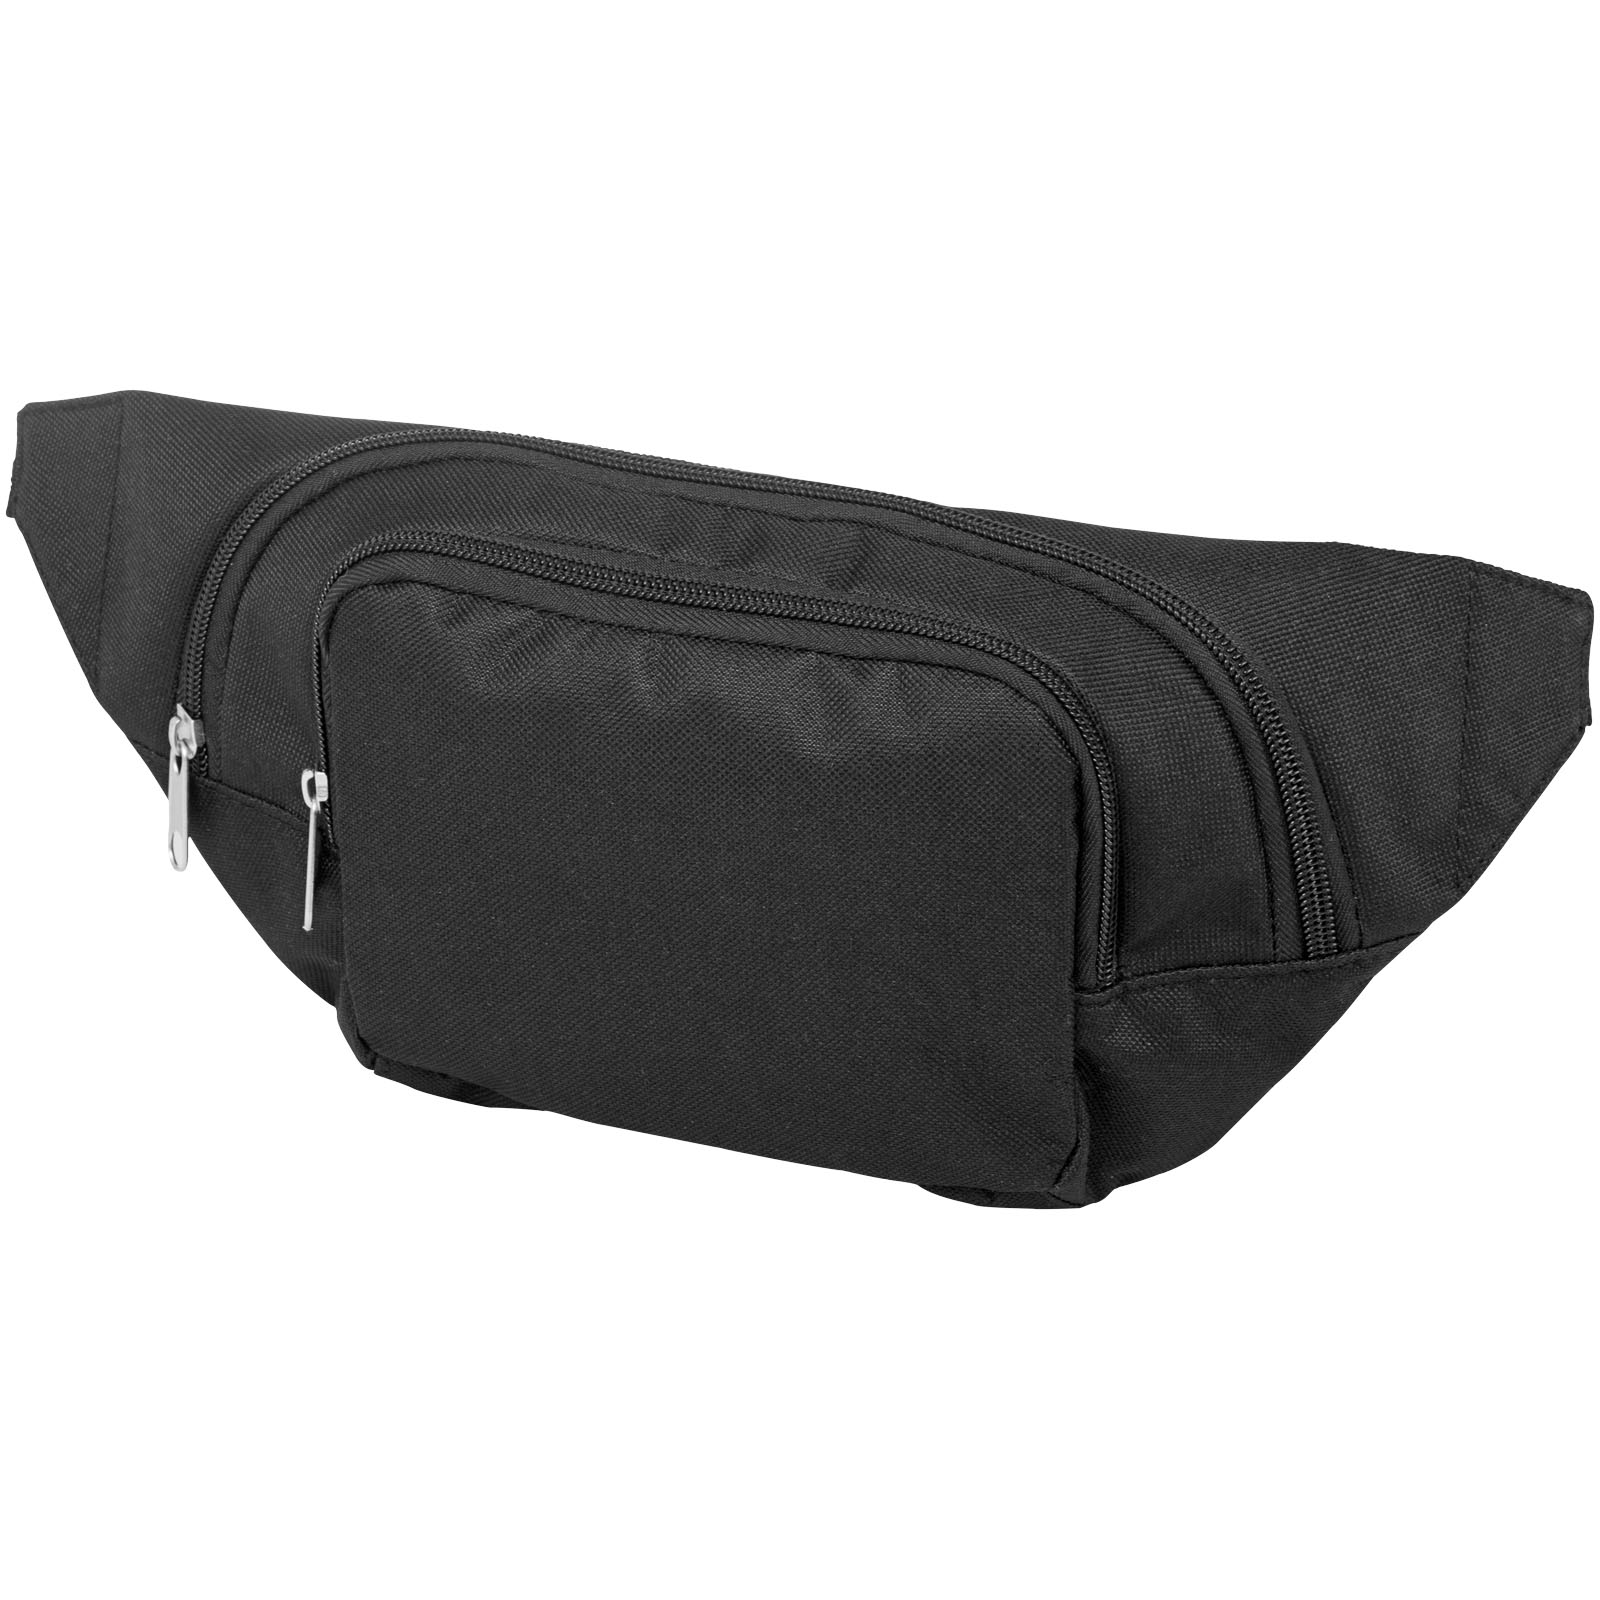 Bags - Santander fanny pack with two compartments